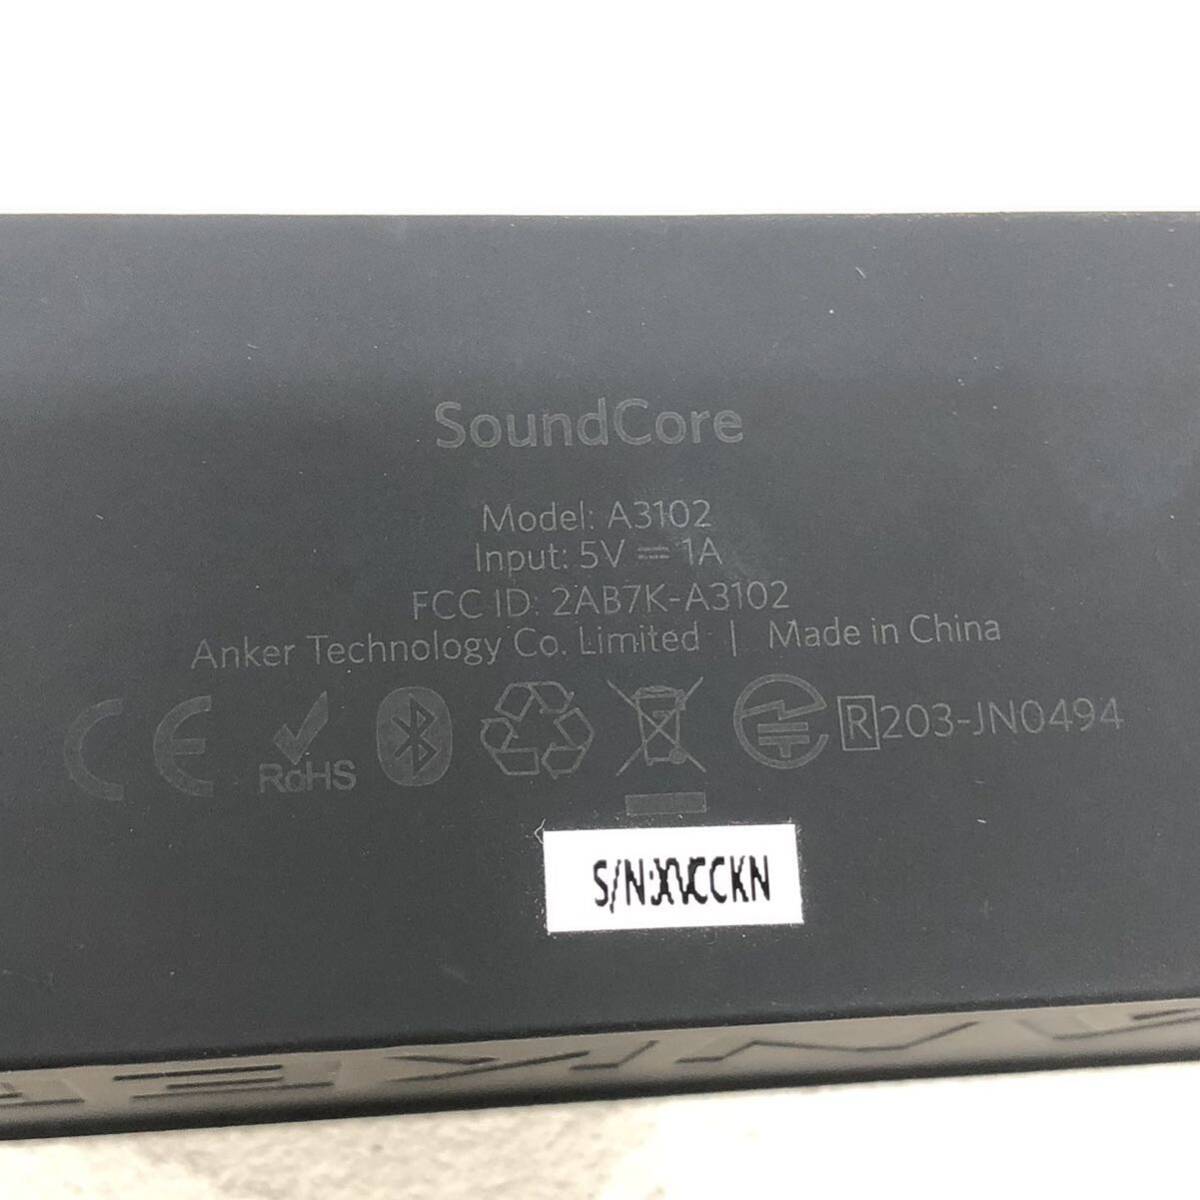 H# ANKER SoundCore anchor sound core Bluetooth speaker A3102 black wireless speaker small size compact electrification verification settled 